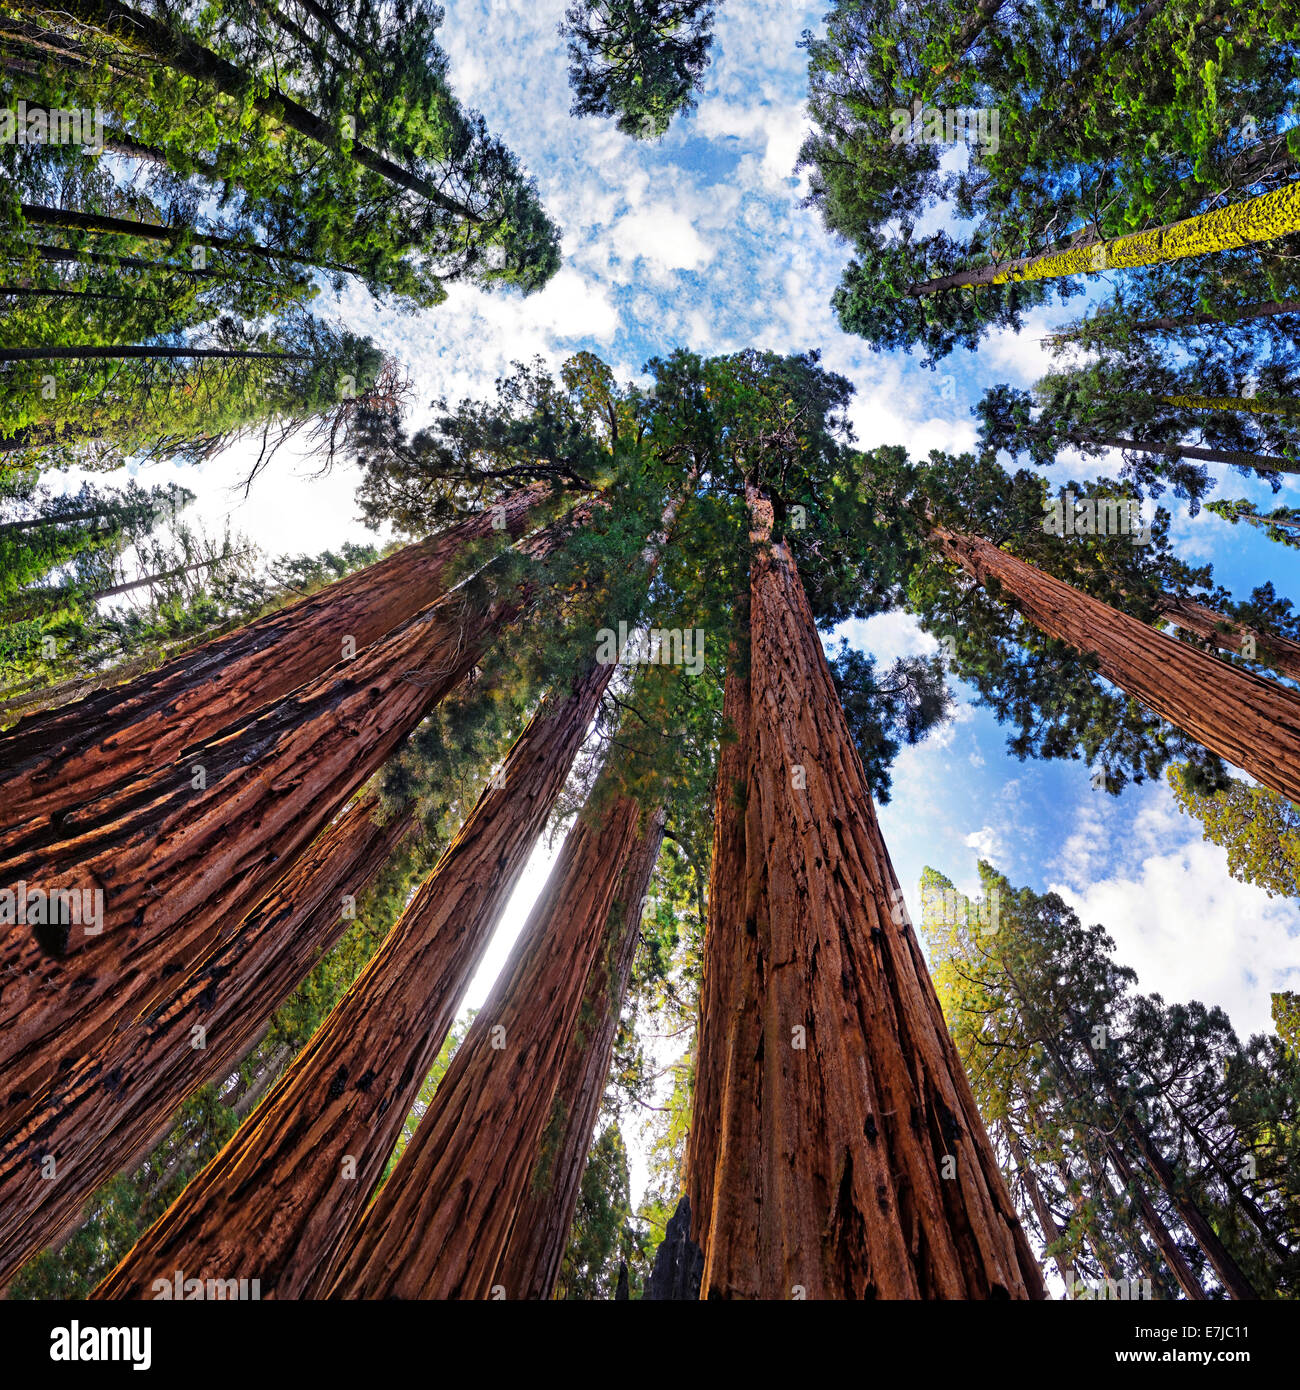 Giant sequoia trees (Sequoiadendron giganteum), frog perspective, the Giant Forest, Sequoia National Park, California Stock Photo